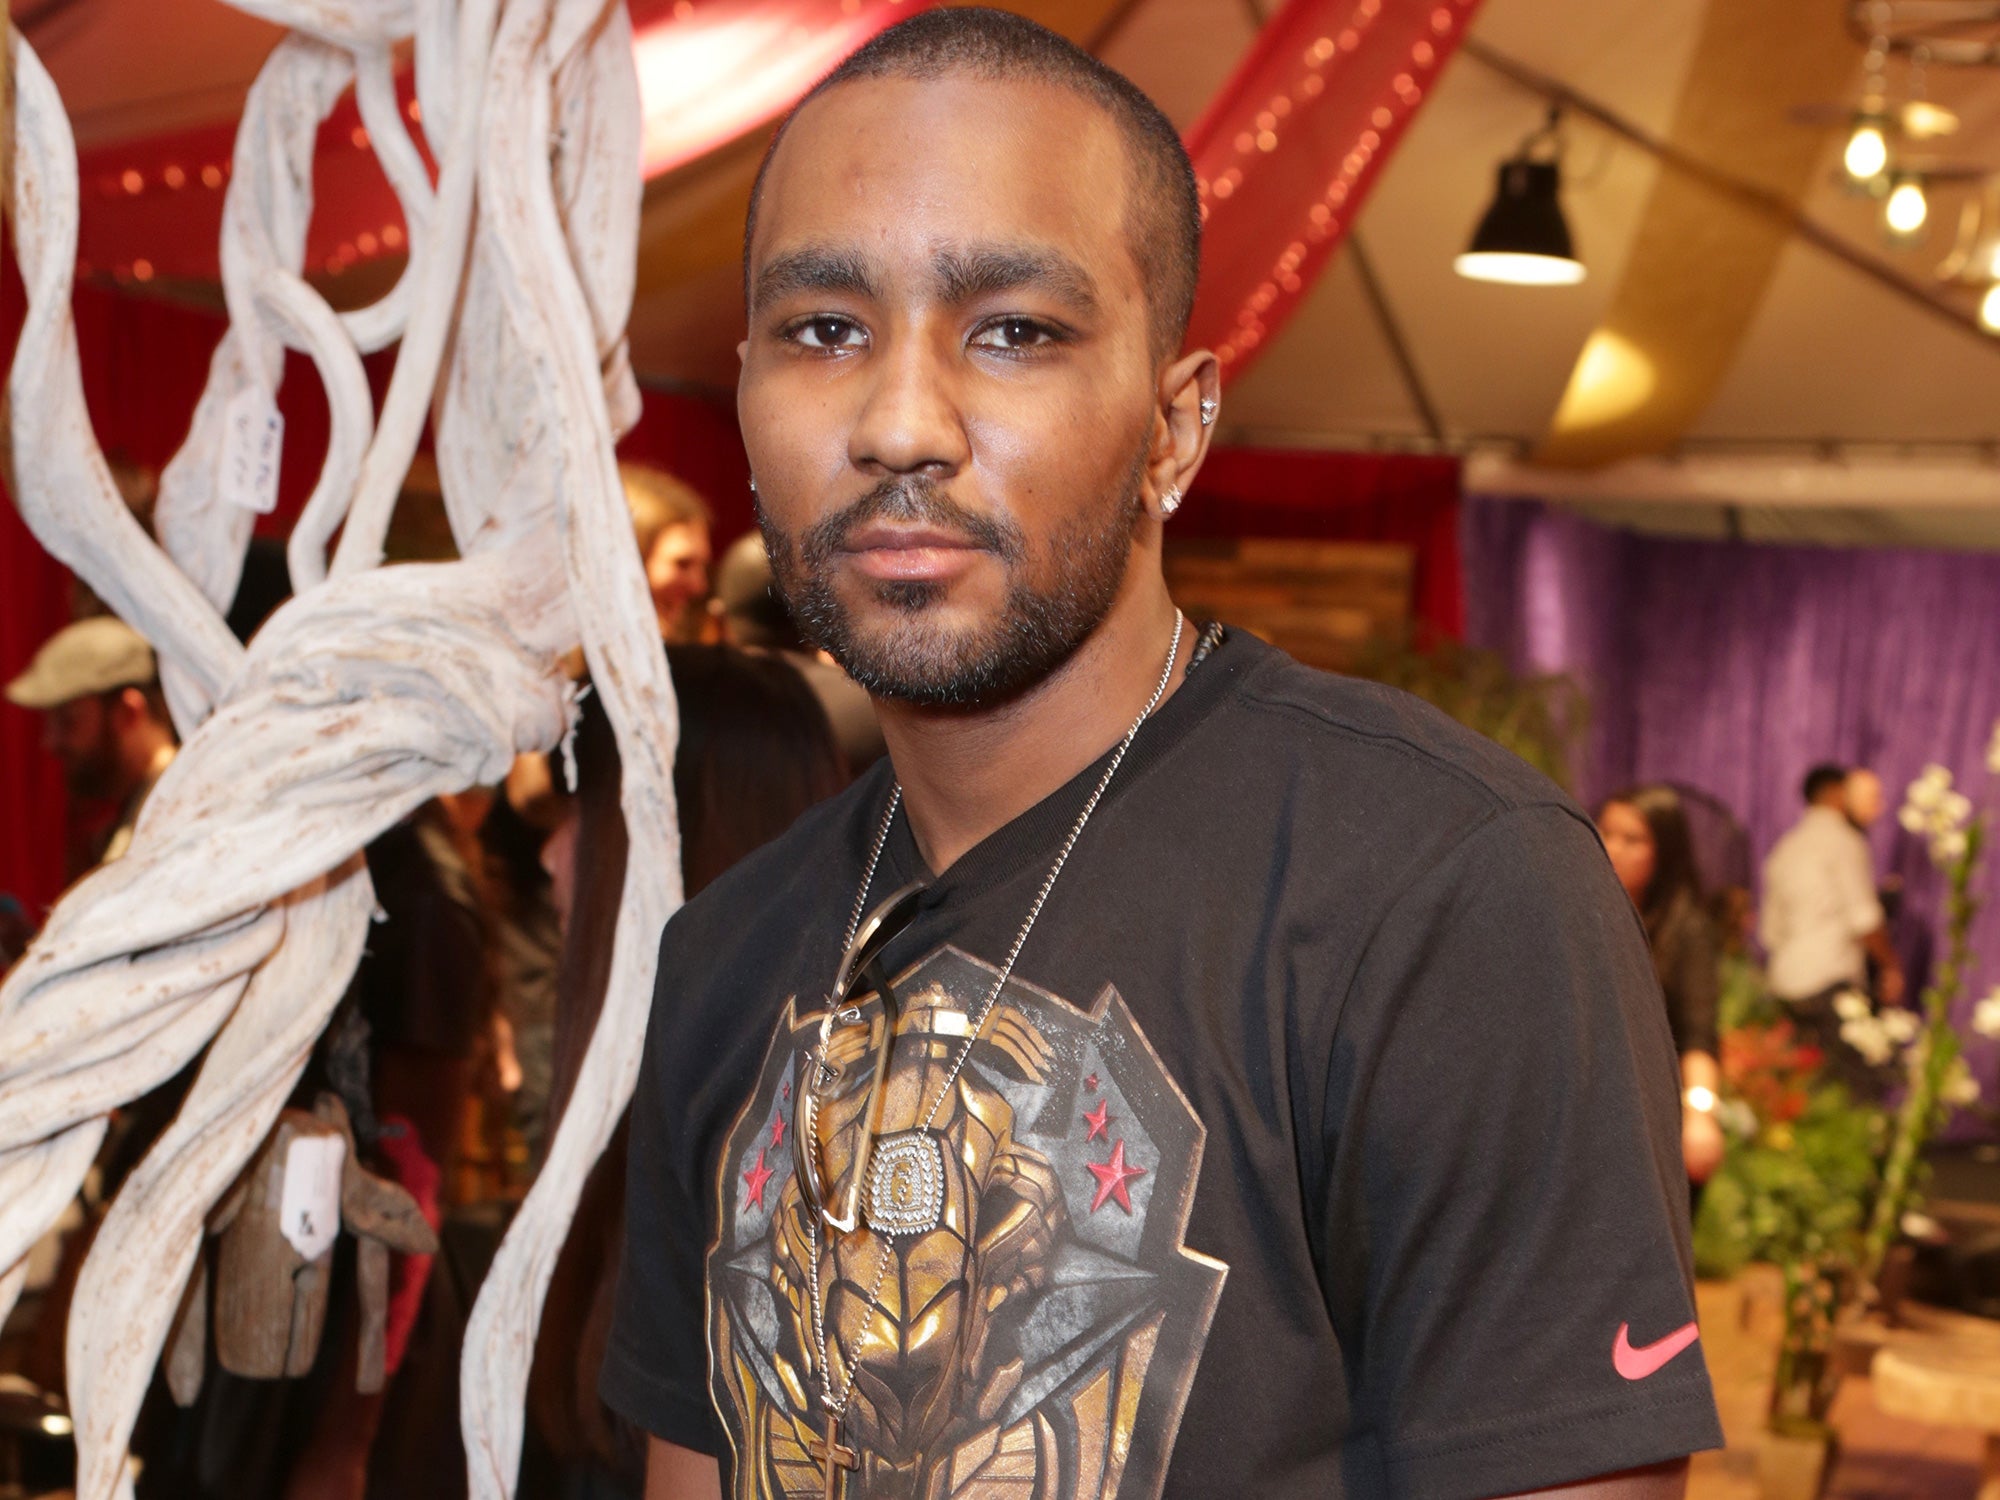 The Quick Read: Bobbi Kristina's Ex Nick Gordon Arrested On Domestic Violence Charges
